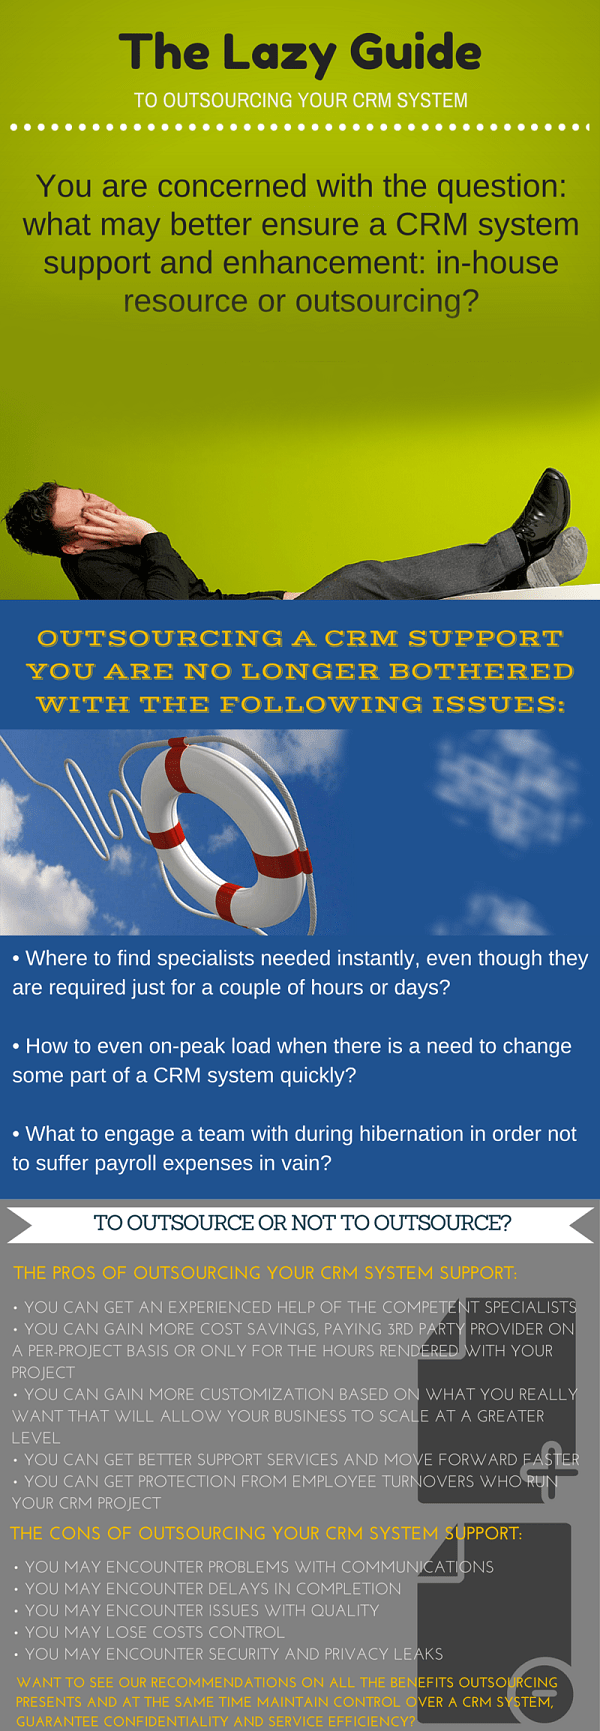 The Lazy Guide to Outsourcing your CRM system [Infographic]-1